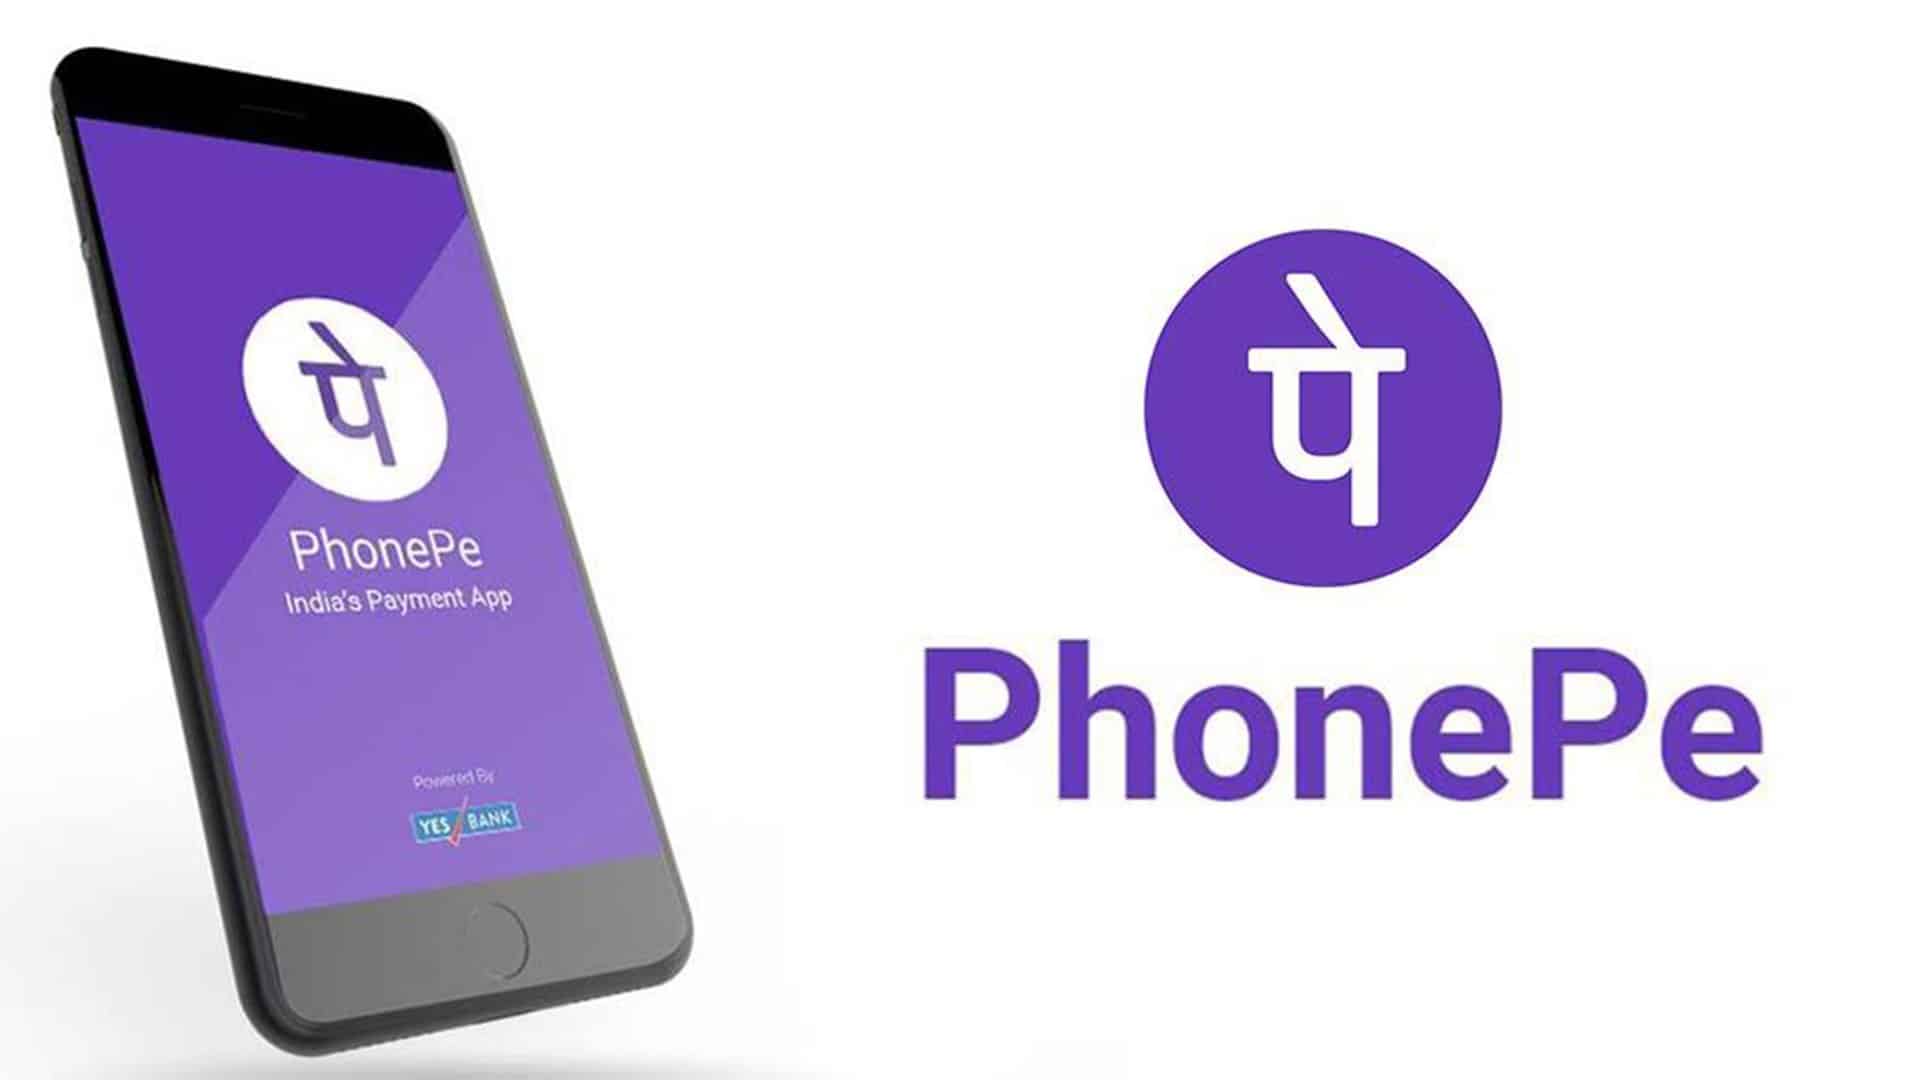 PhonePe pledges to increase female representation in leadership roles